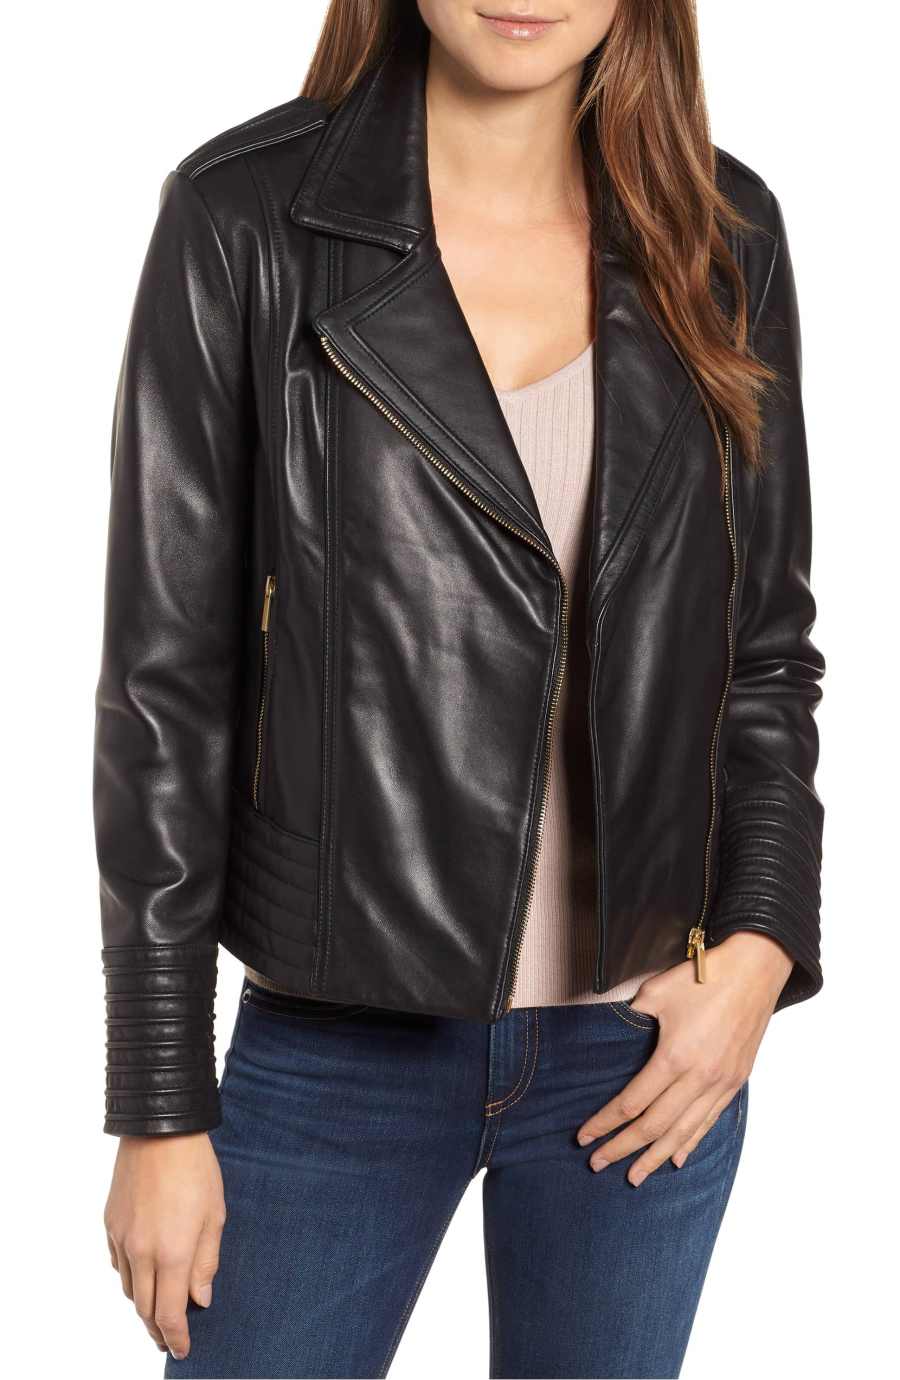 Shop This Badgley Mischka Leather Jacket on Sale at Nordstrom | Us Weekly